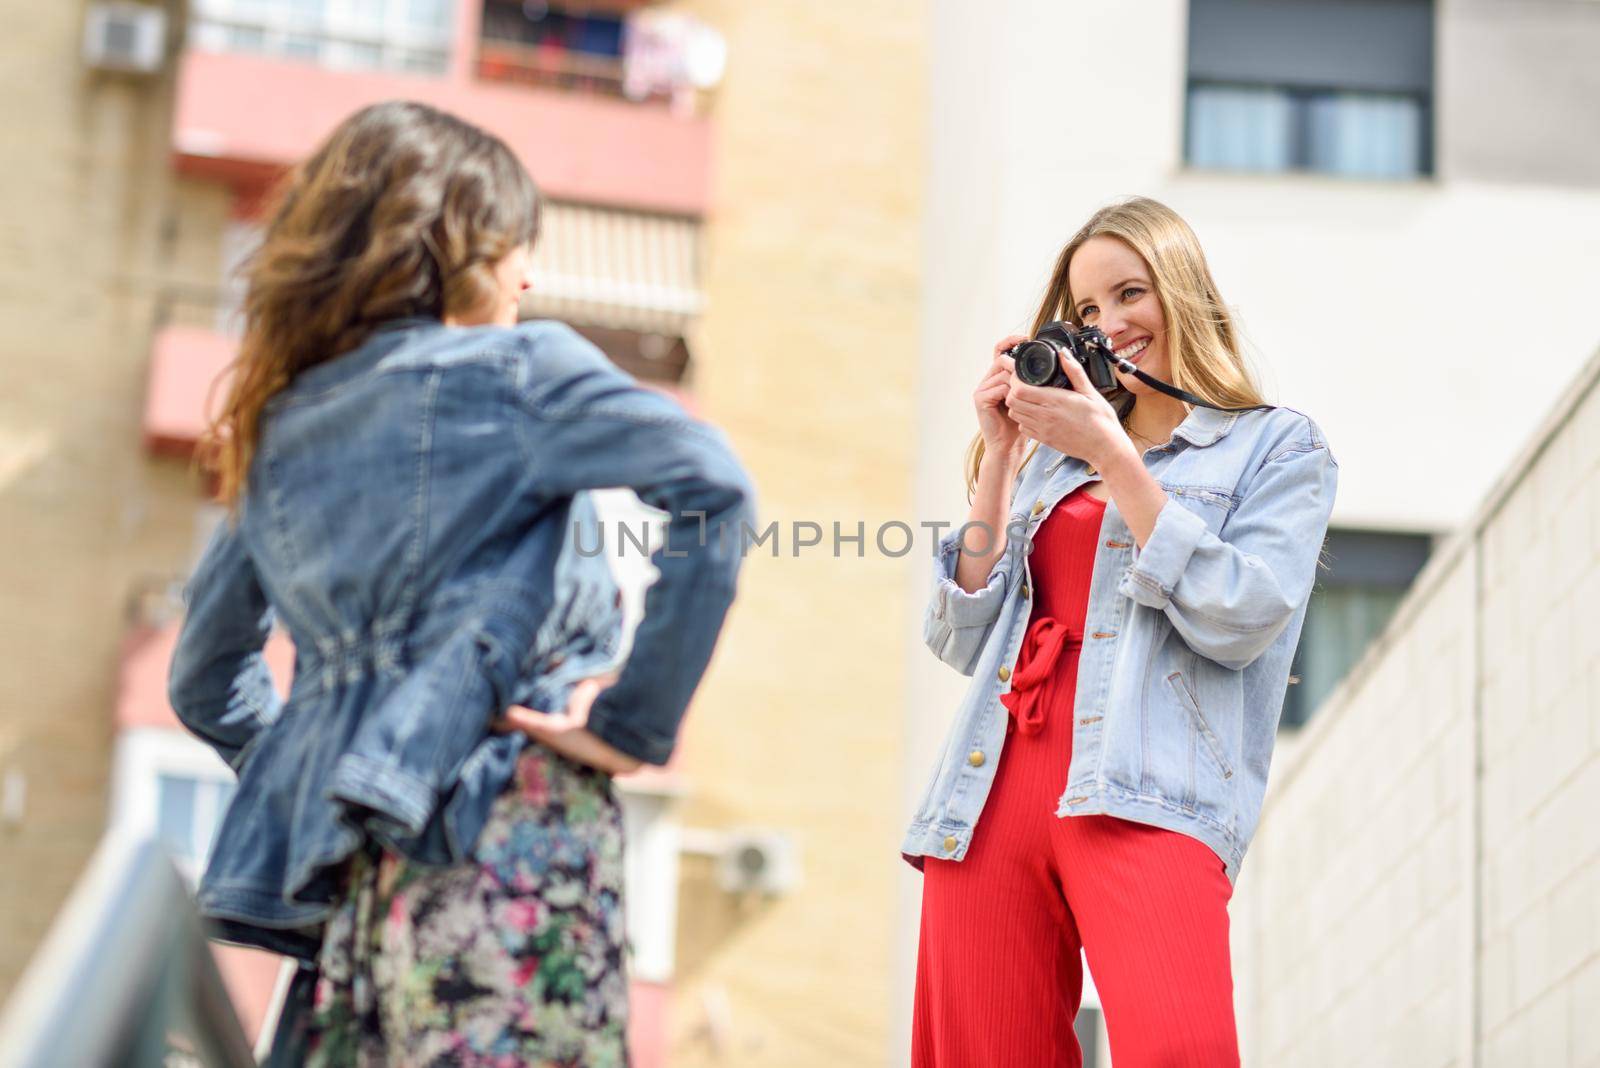 Two young tourist women taking photographs outdoors by javiindy